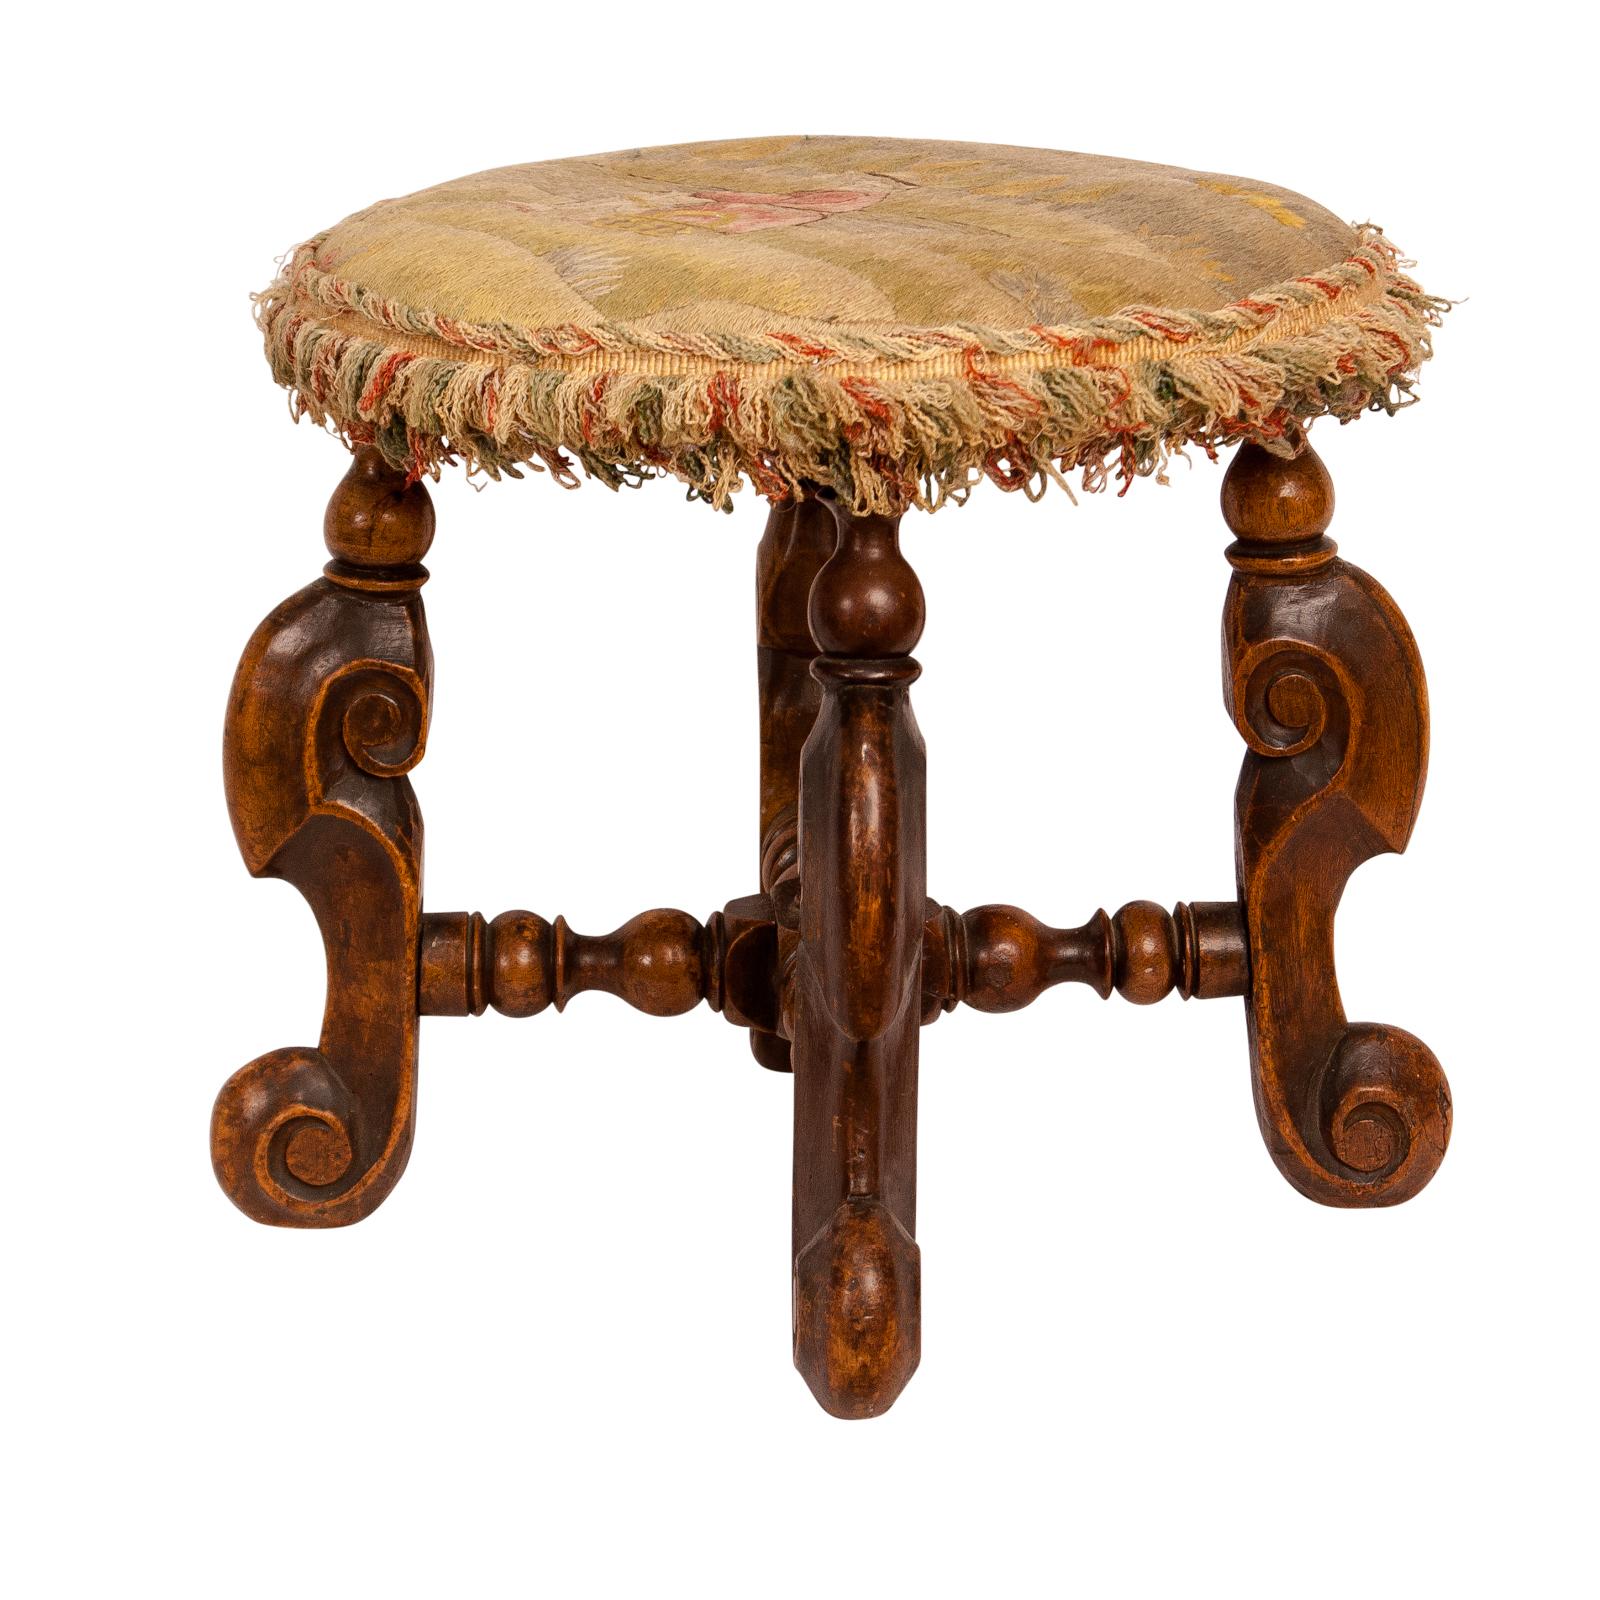 An early 17th century French walnut Louis XIII period foot stool, circa 1620. Great color and patina. Upholstered in crewel needlework probably associated.
 
 